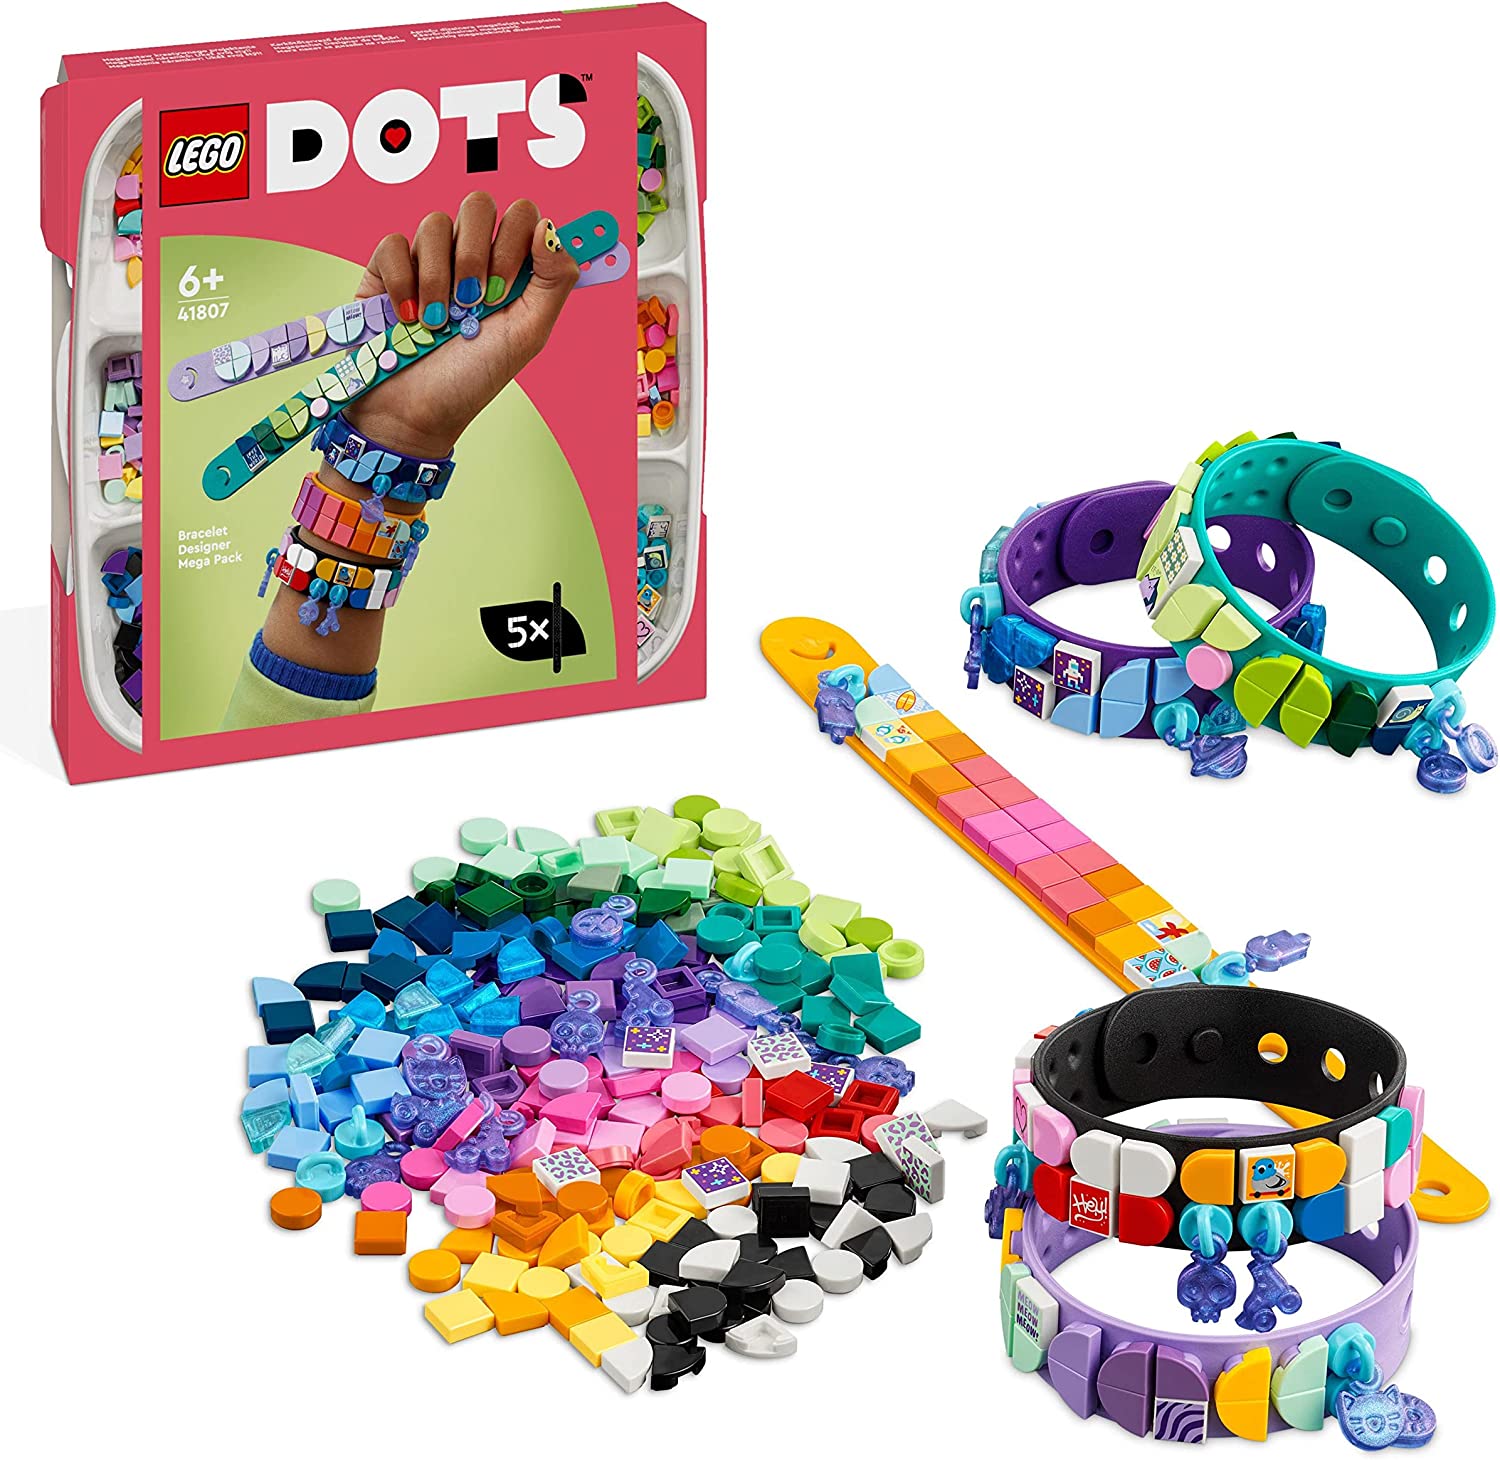 LEGO 41807 DOTS Bracelet Design Creative Set, 5-in-1 DIY Jewellery Craft Set with Mosaic Stones in Cosmic and Summer Colours for Friendship Bracelets and Accessories for Children